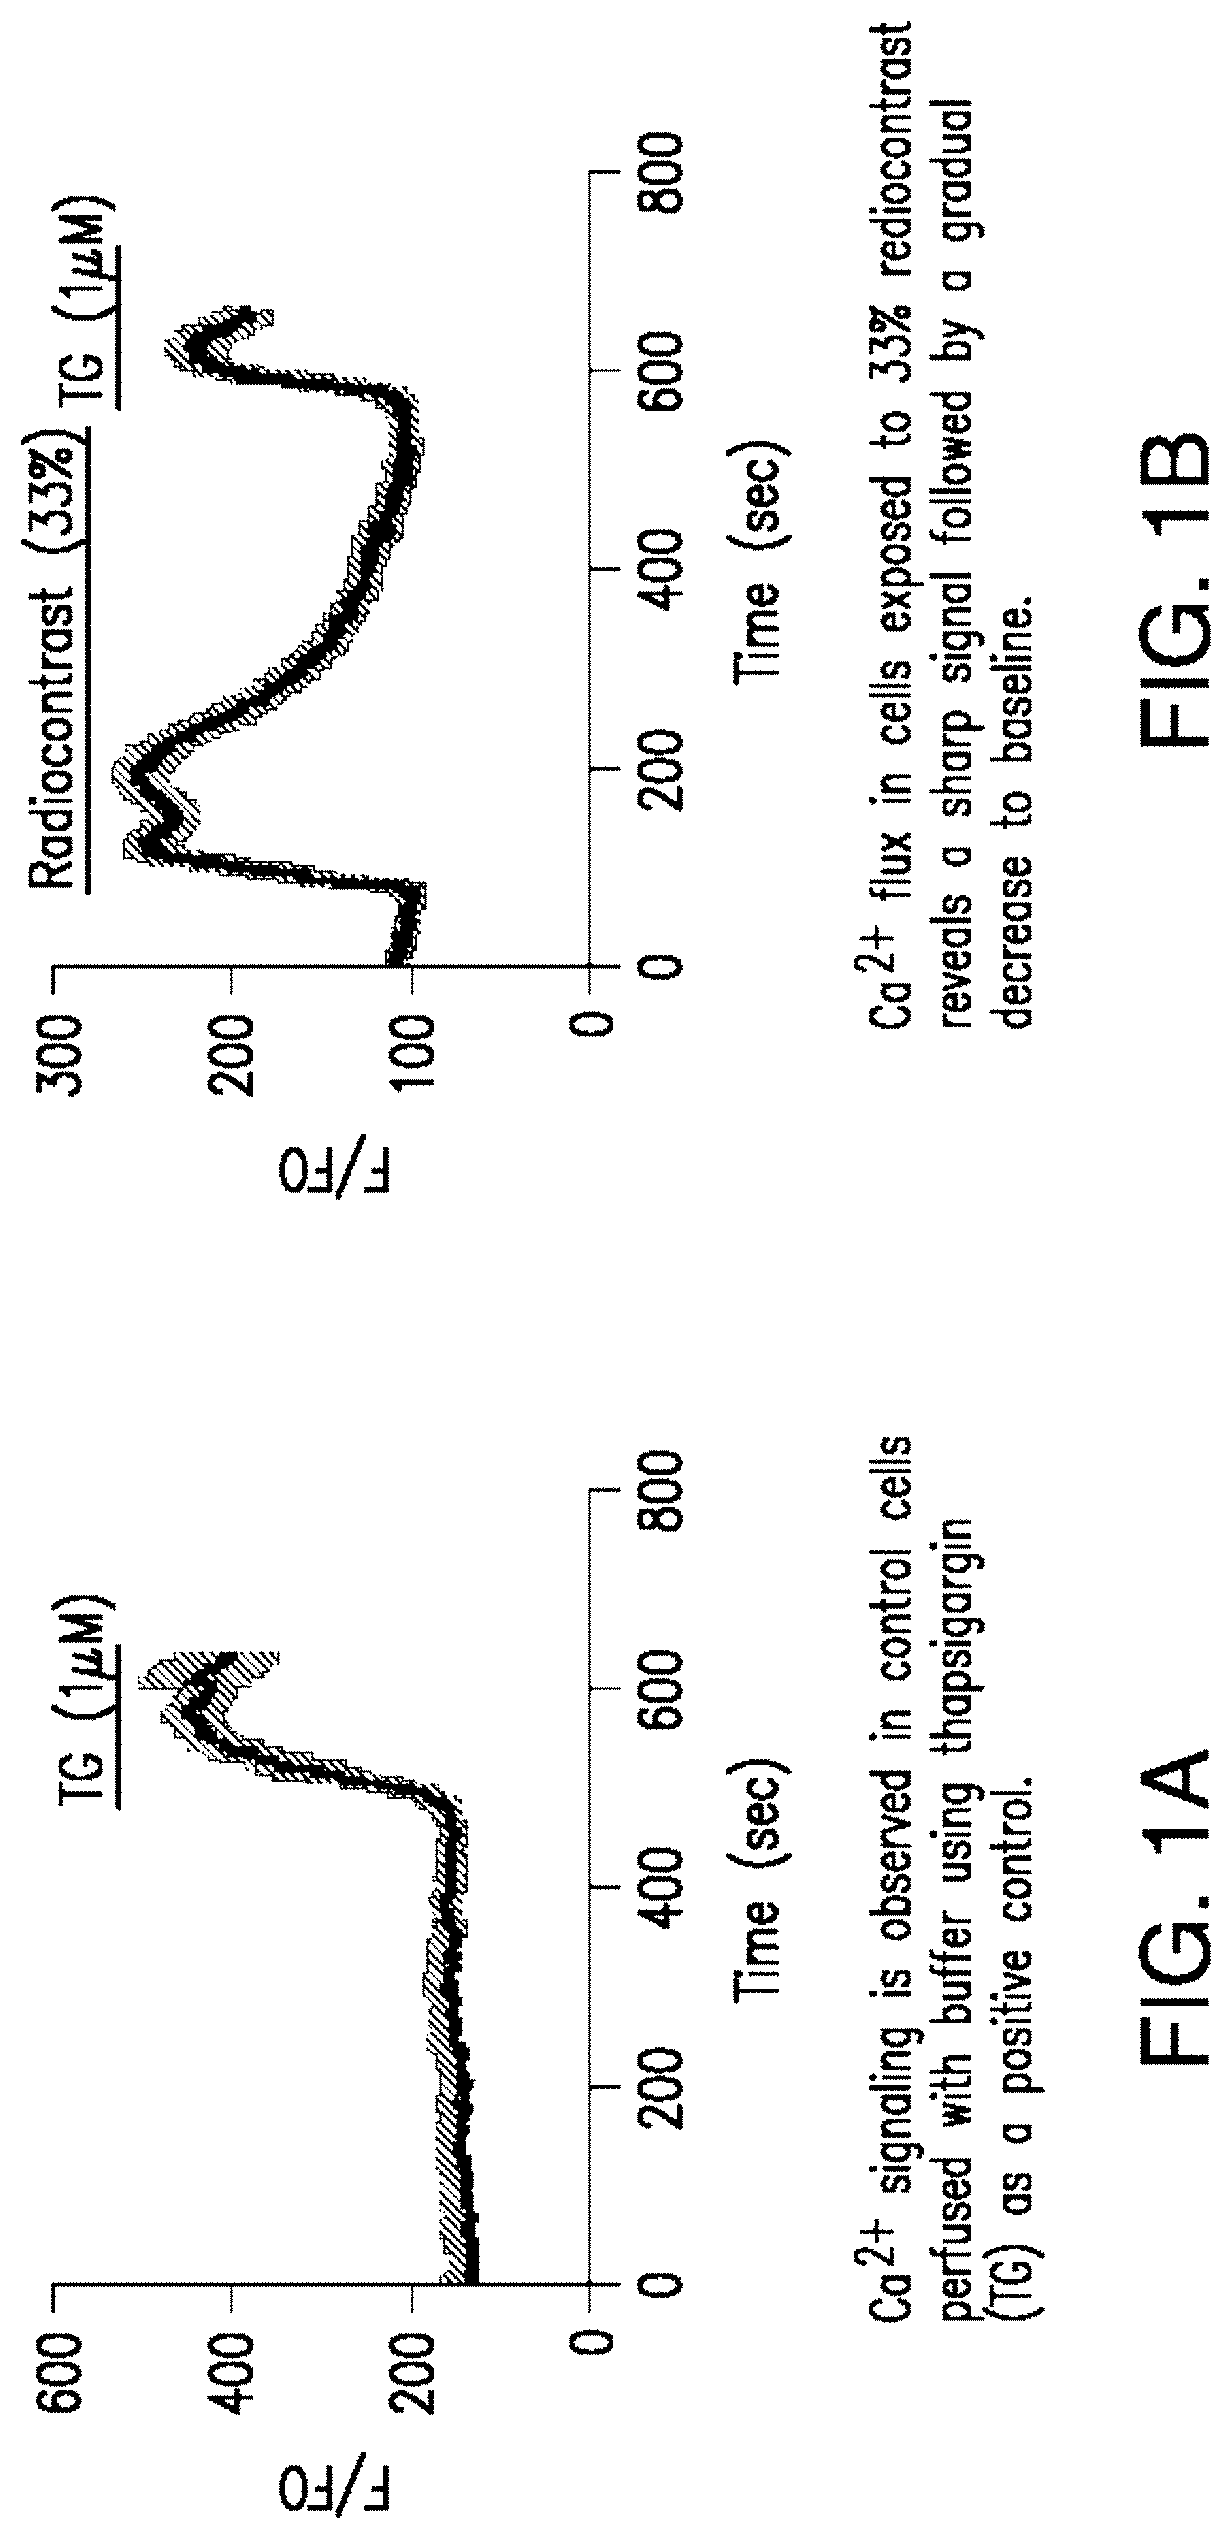 Compositions and methods for reducing the risk of radiocontrast-induced nephropathy